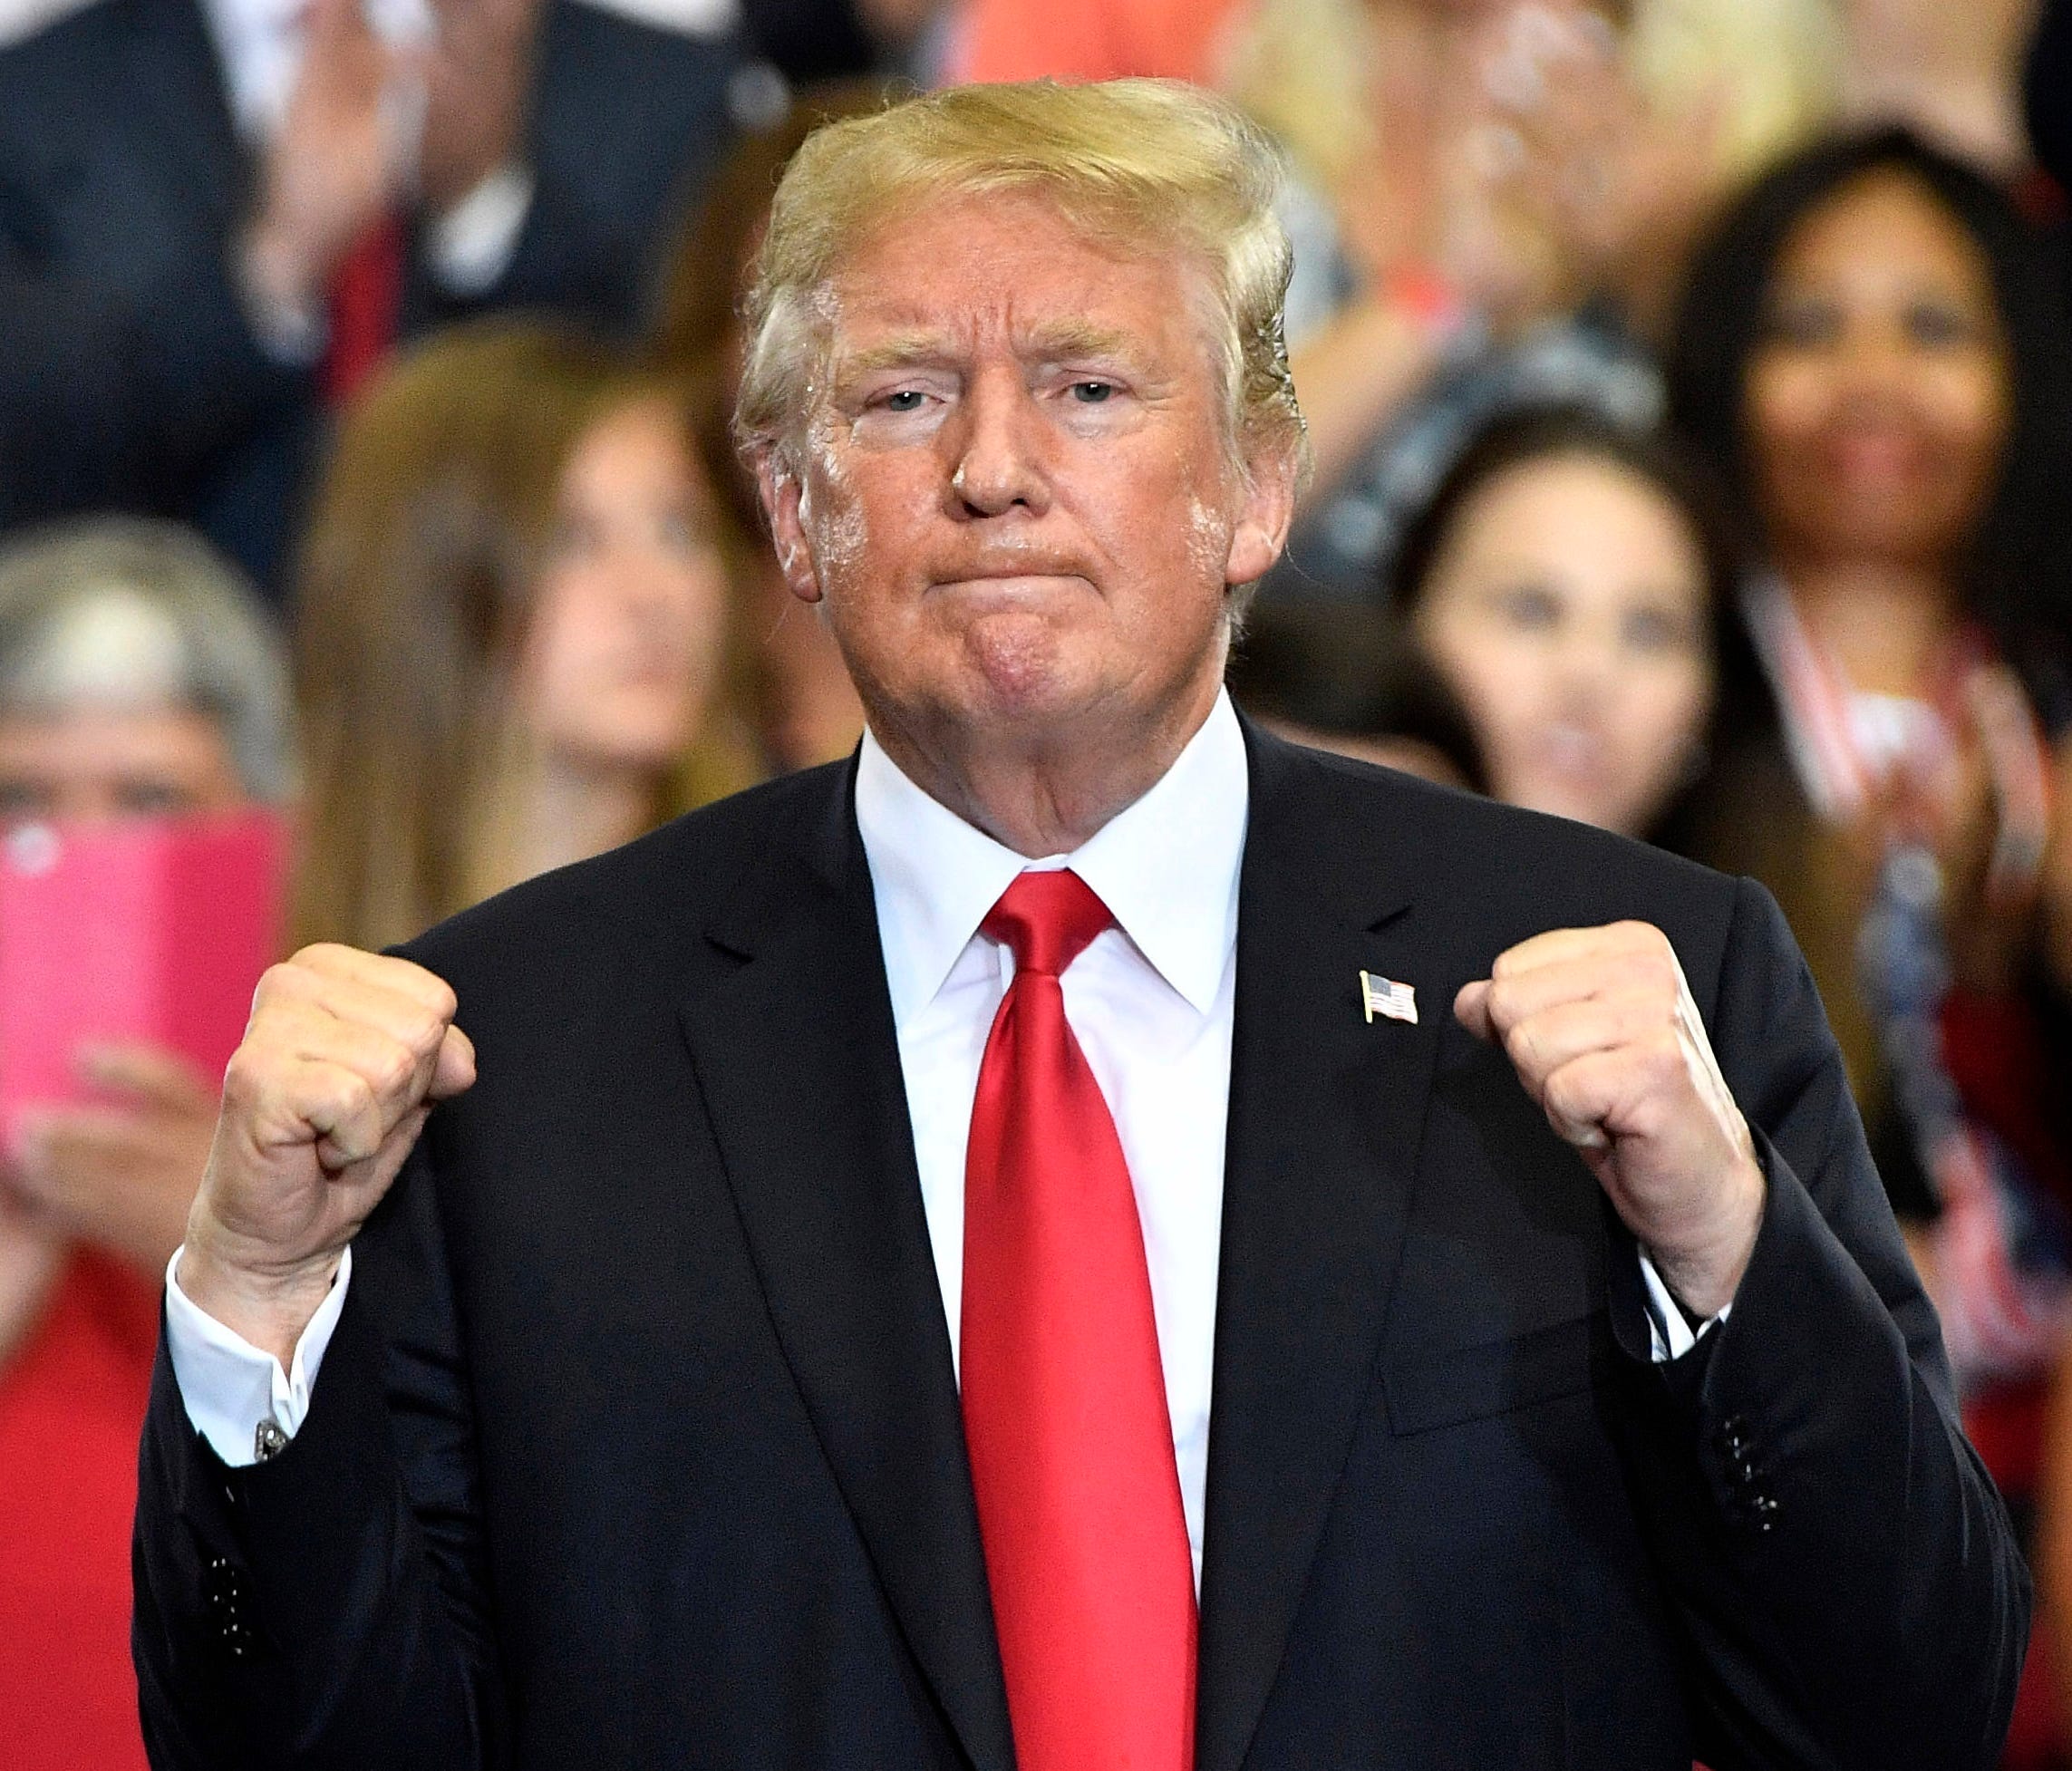 President Trump gestures during his rally at Municipal Auditorium in Nashville, Tenn., on May 29, 2018.